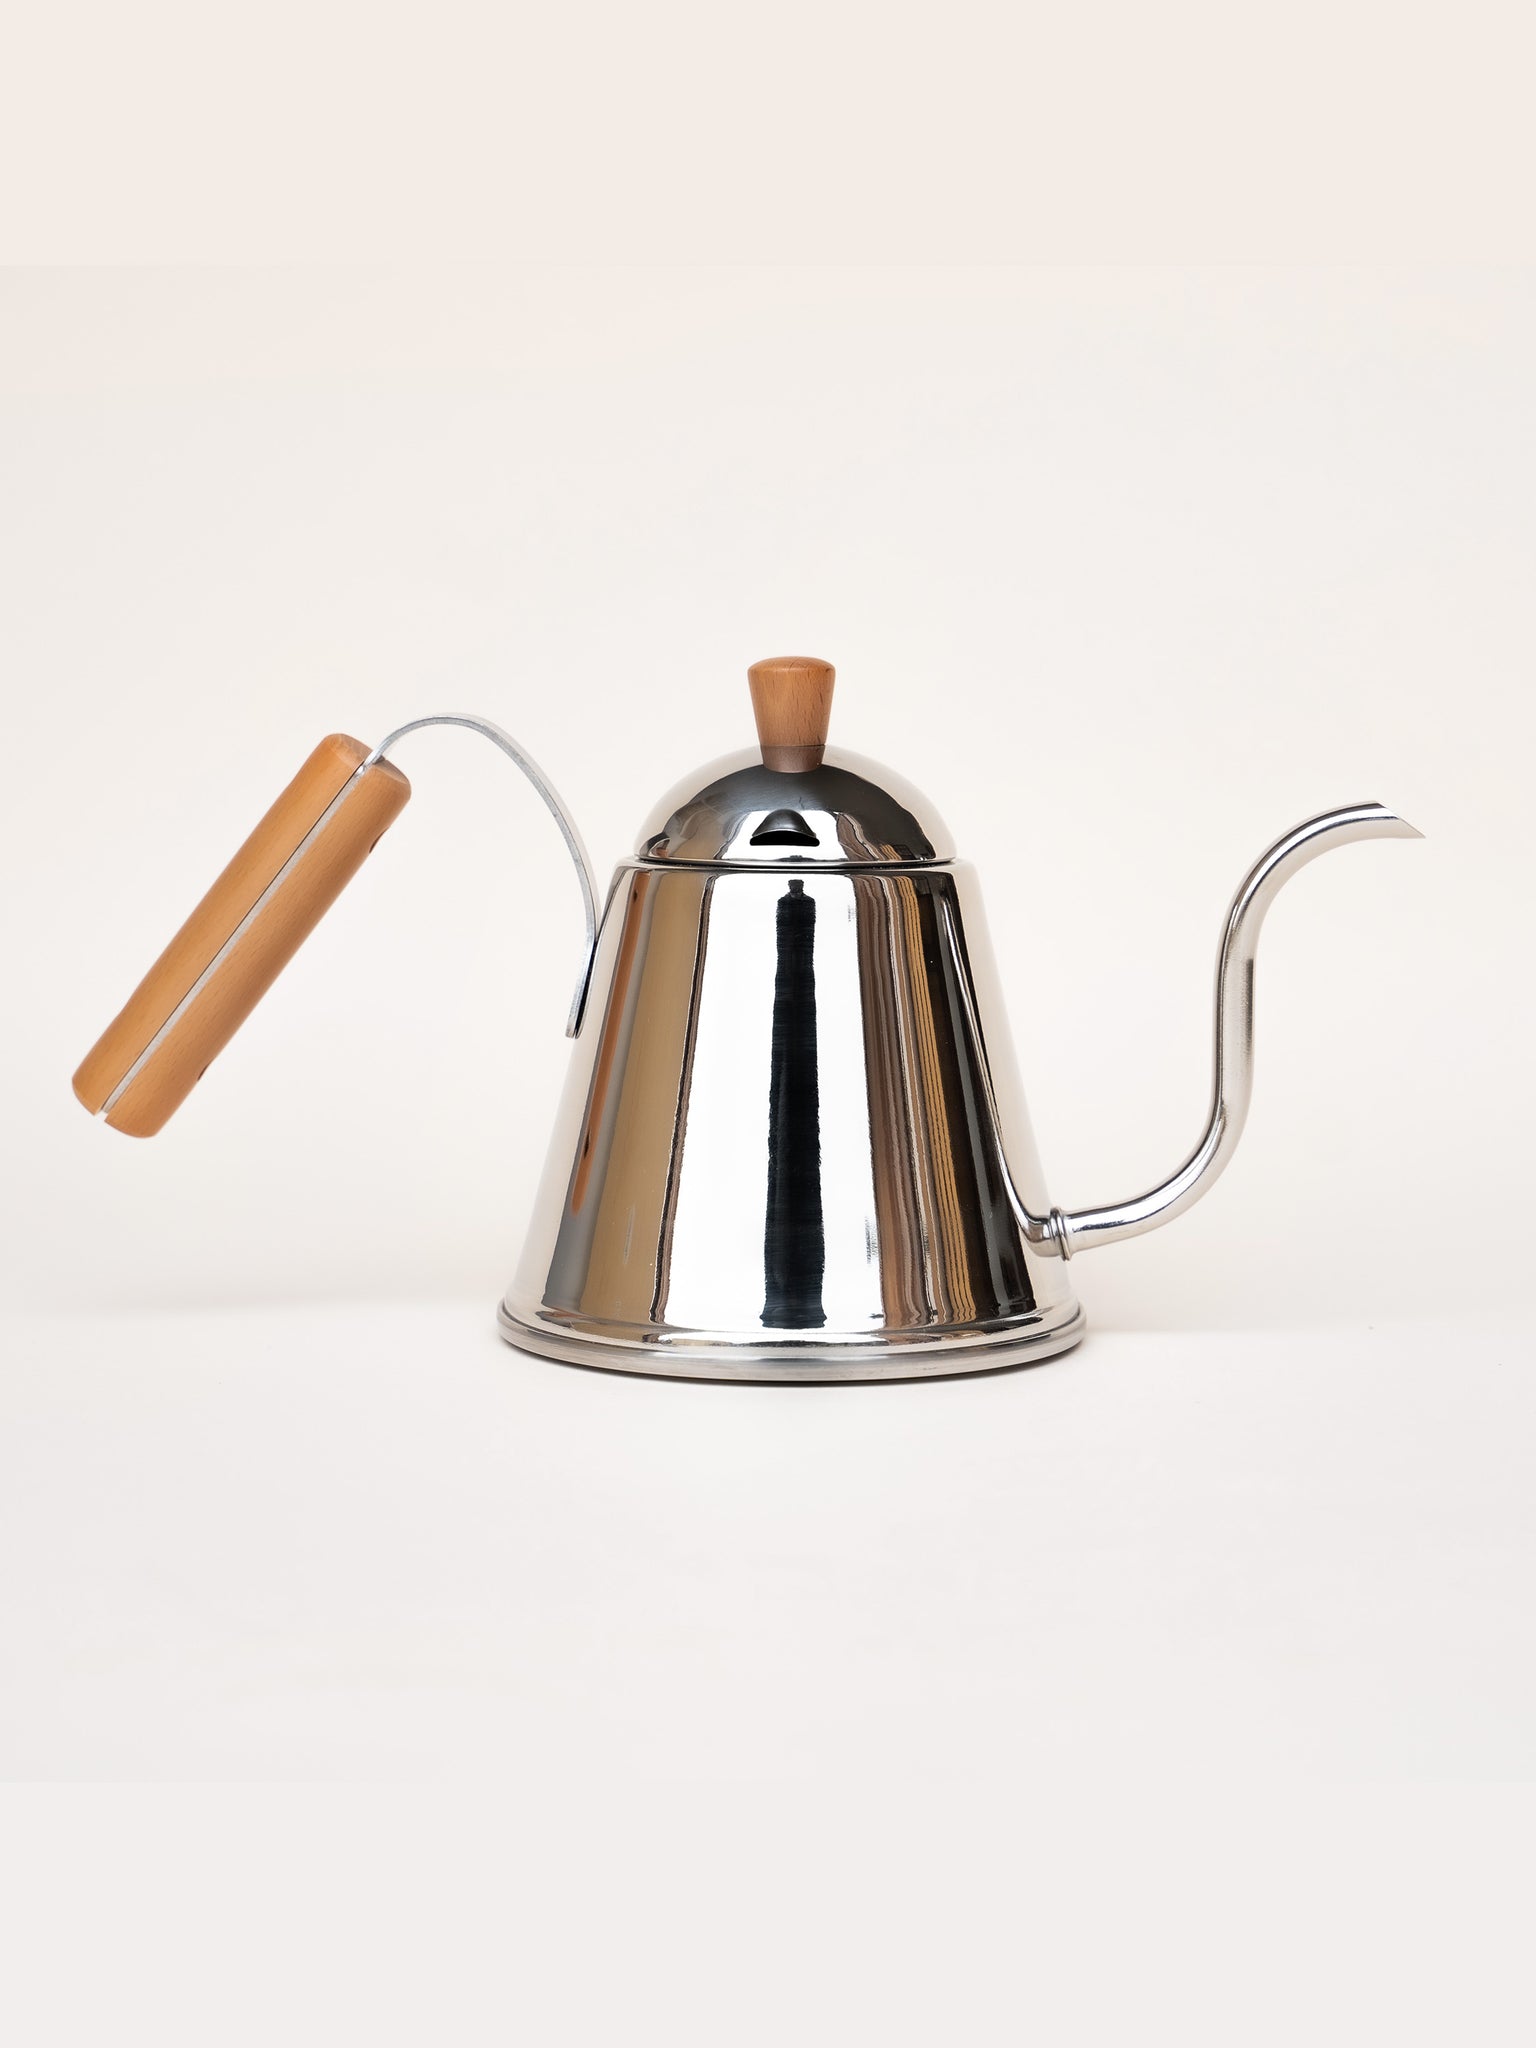 Japanese Stainless Steel Kettle | lifestyle